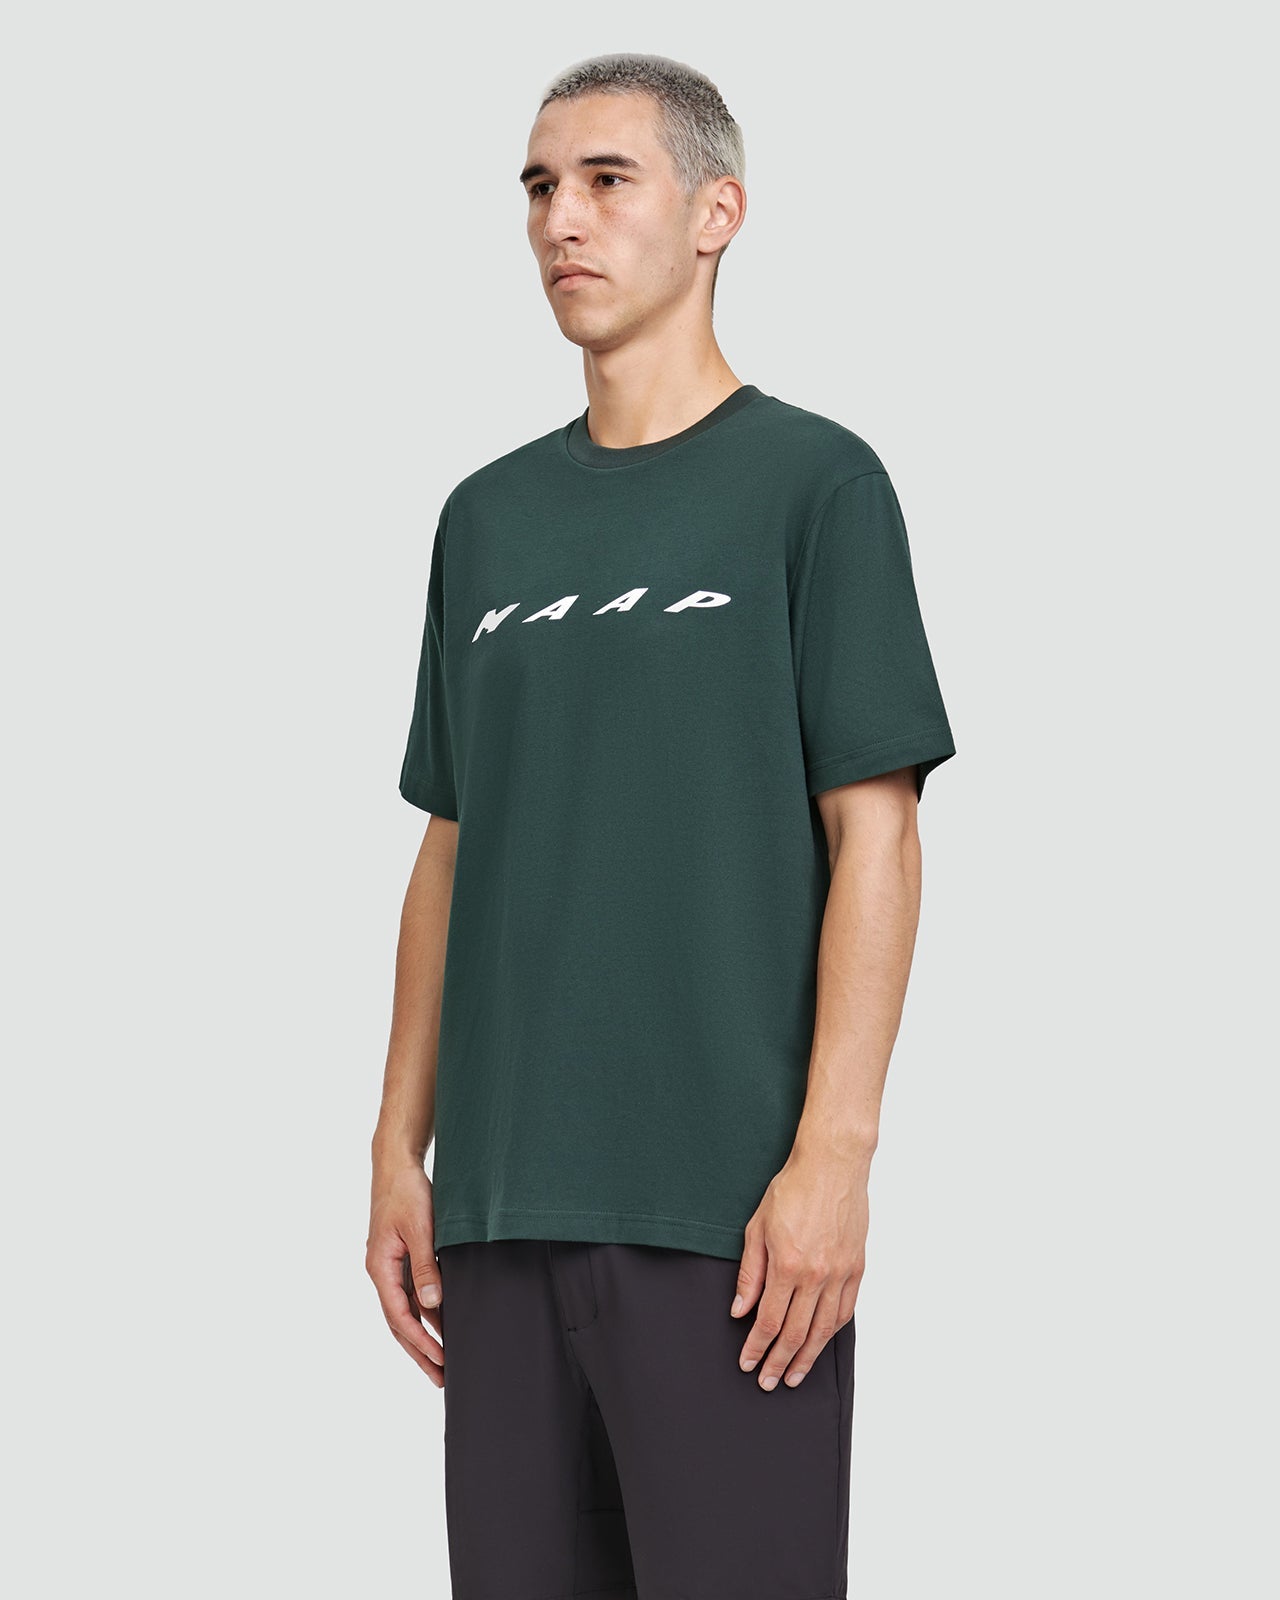 Evade Tee - Forest